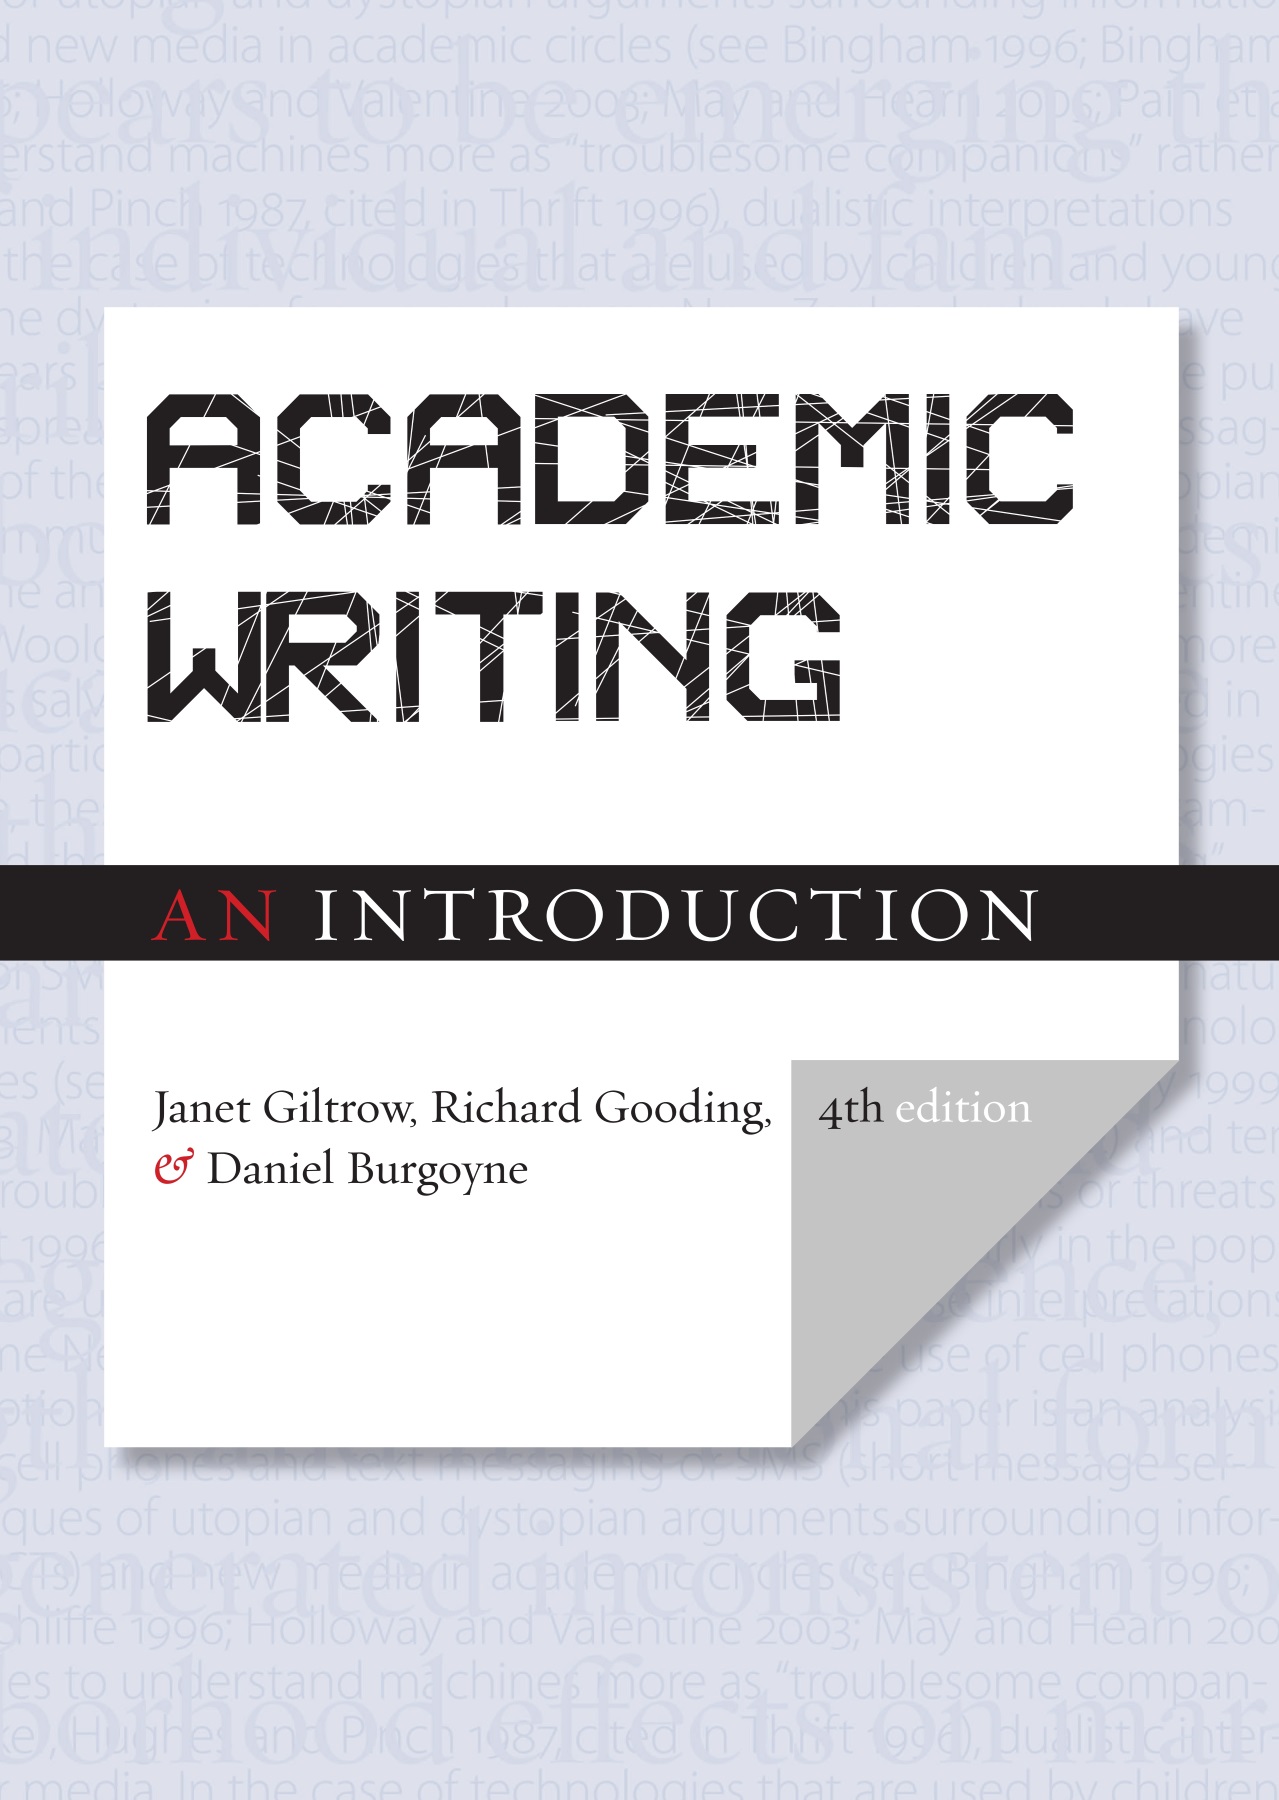 Fourth　Academic　Introduction　Press　Writing:　Broadview　An　Edition